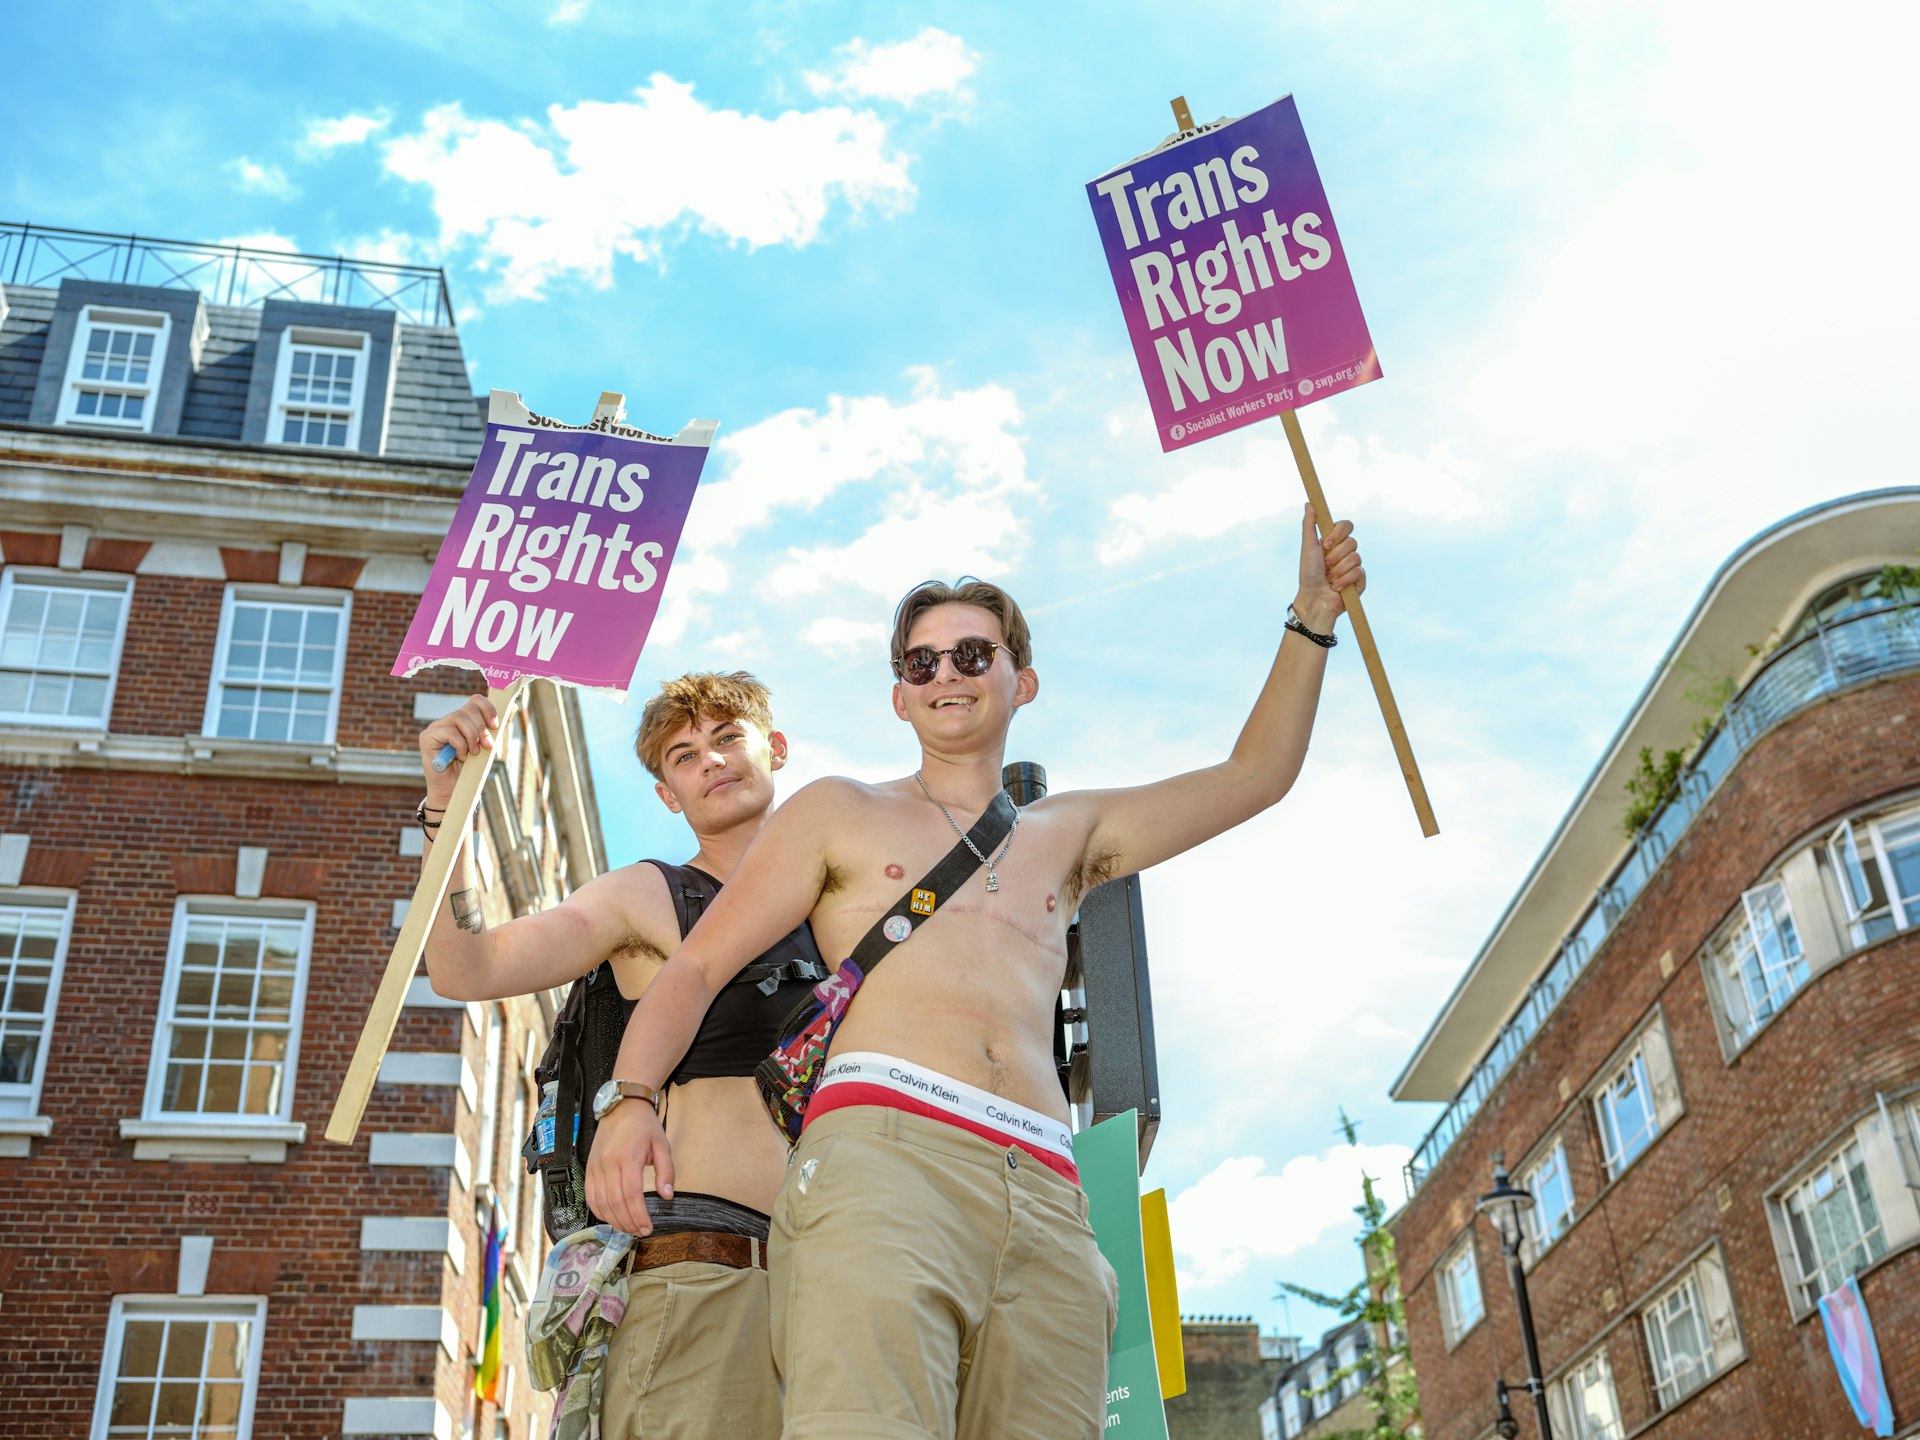 Two people carry signs calling for trans rights during the London Trans Pride march